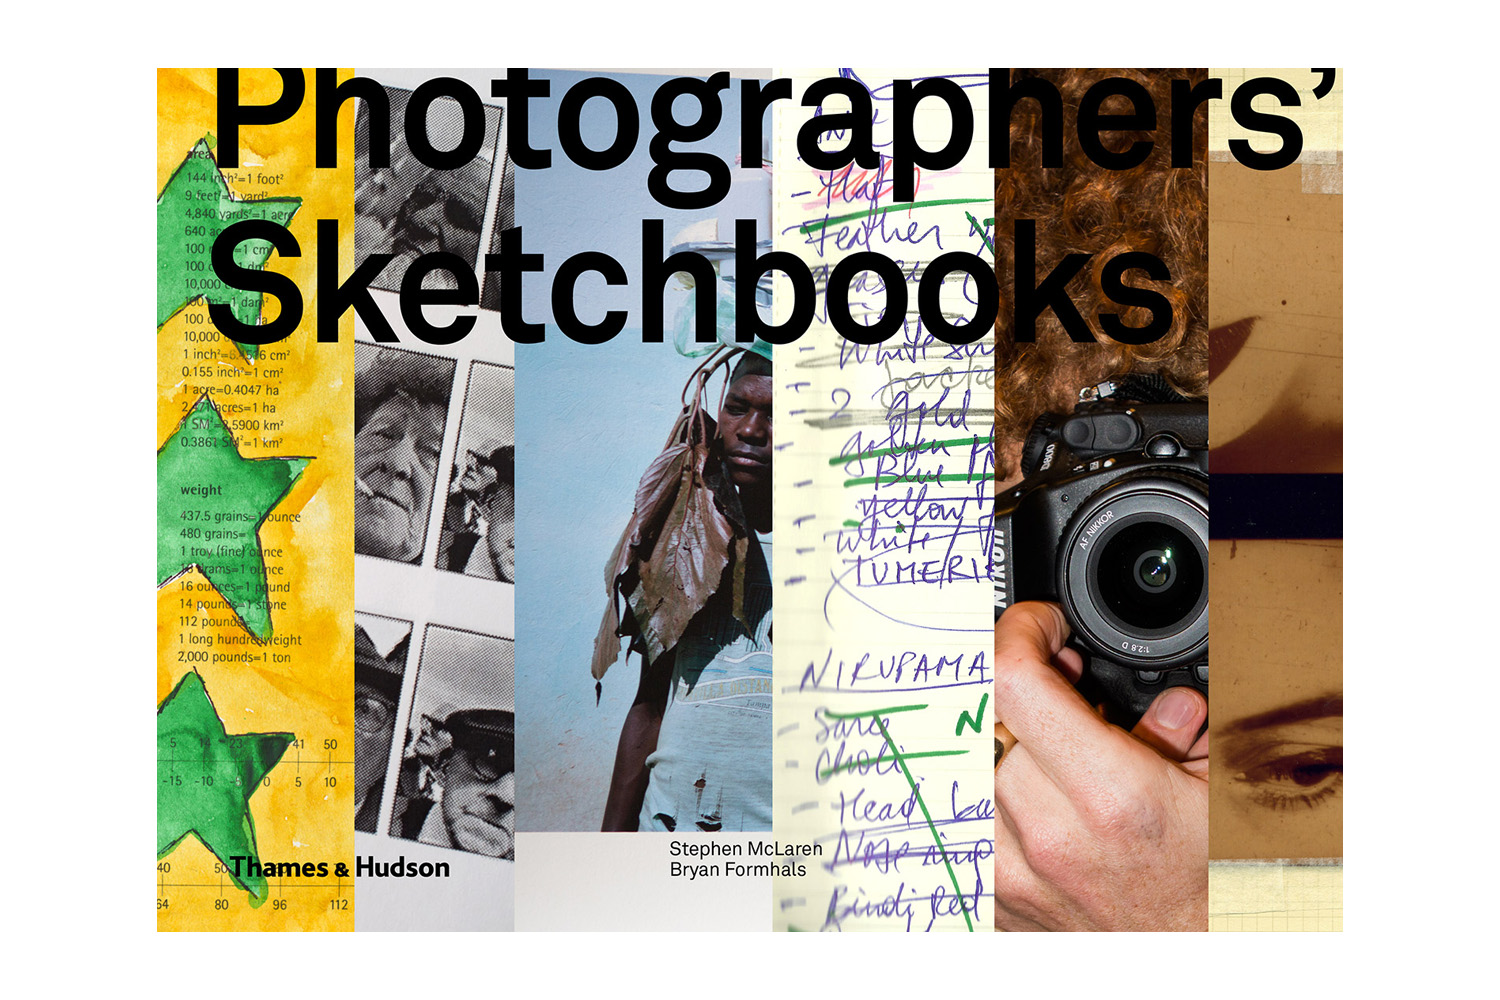 Stephen McLaren &amp; Bryan Formhals' Photographer's Sketchbooks, published by Thames &amp; Hudson
                              A glimpse into the creative process of contemporary photographers, this compilation of scribbles and sidenotes reveals the raw ideas of some of modern photography's most inventive artists.